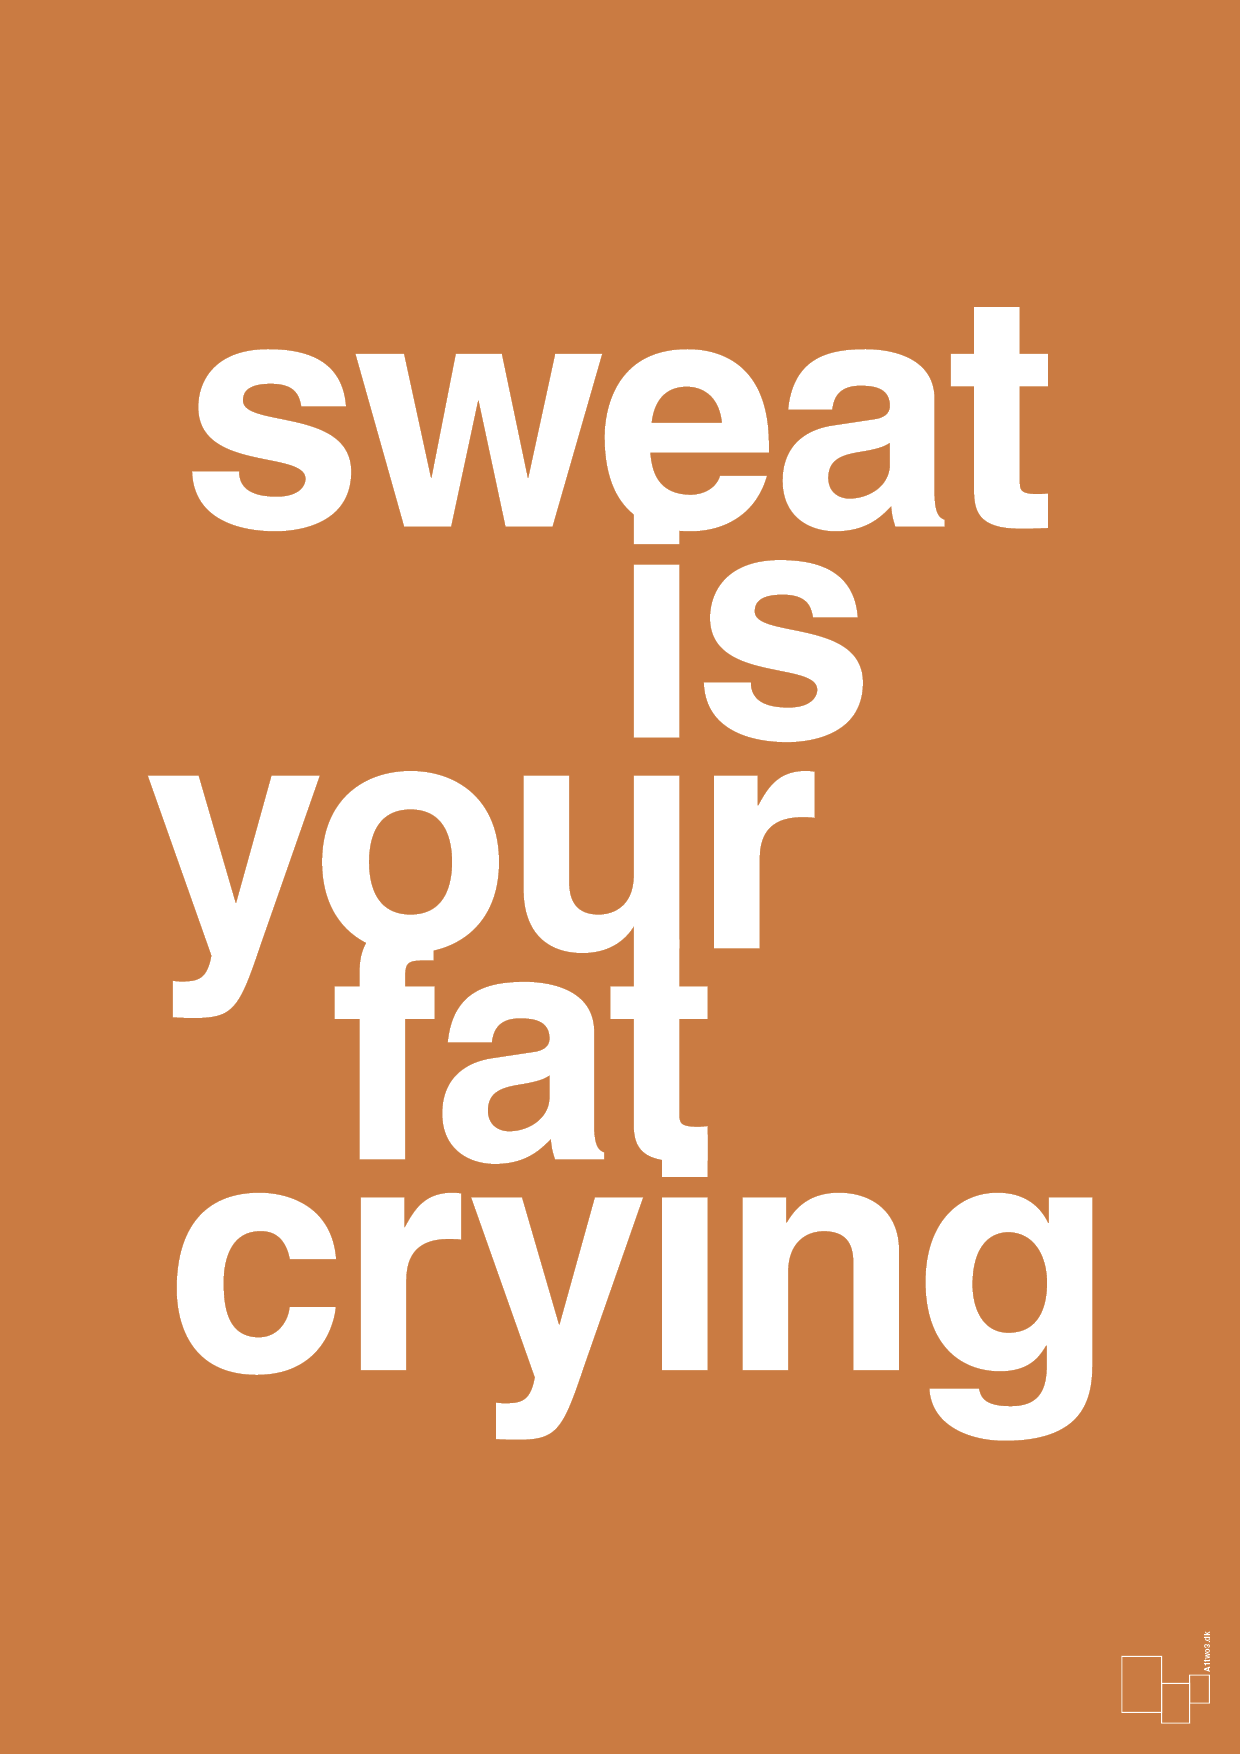 sweat is your fat crying - Plakat med Sport & Fritid i Rumba Orange